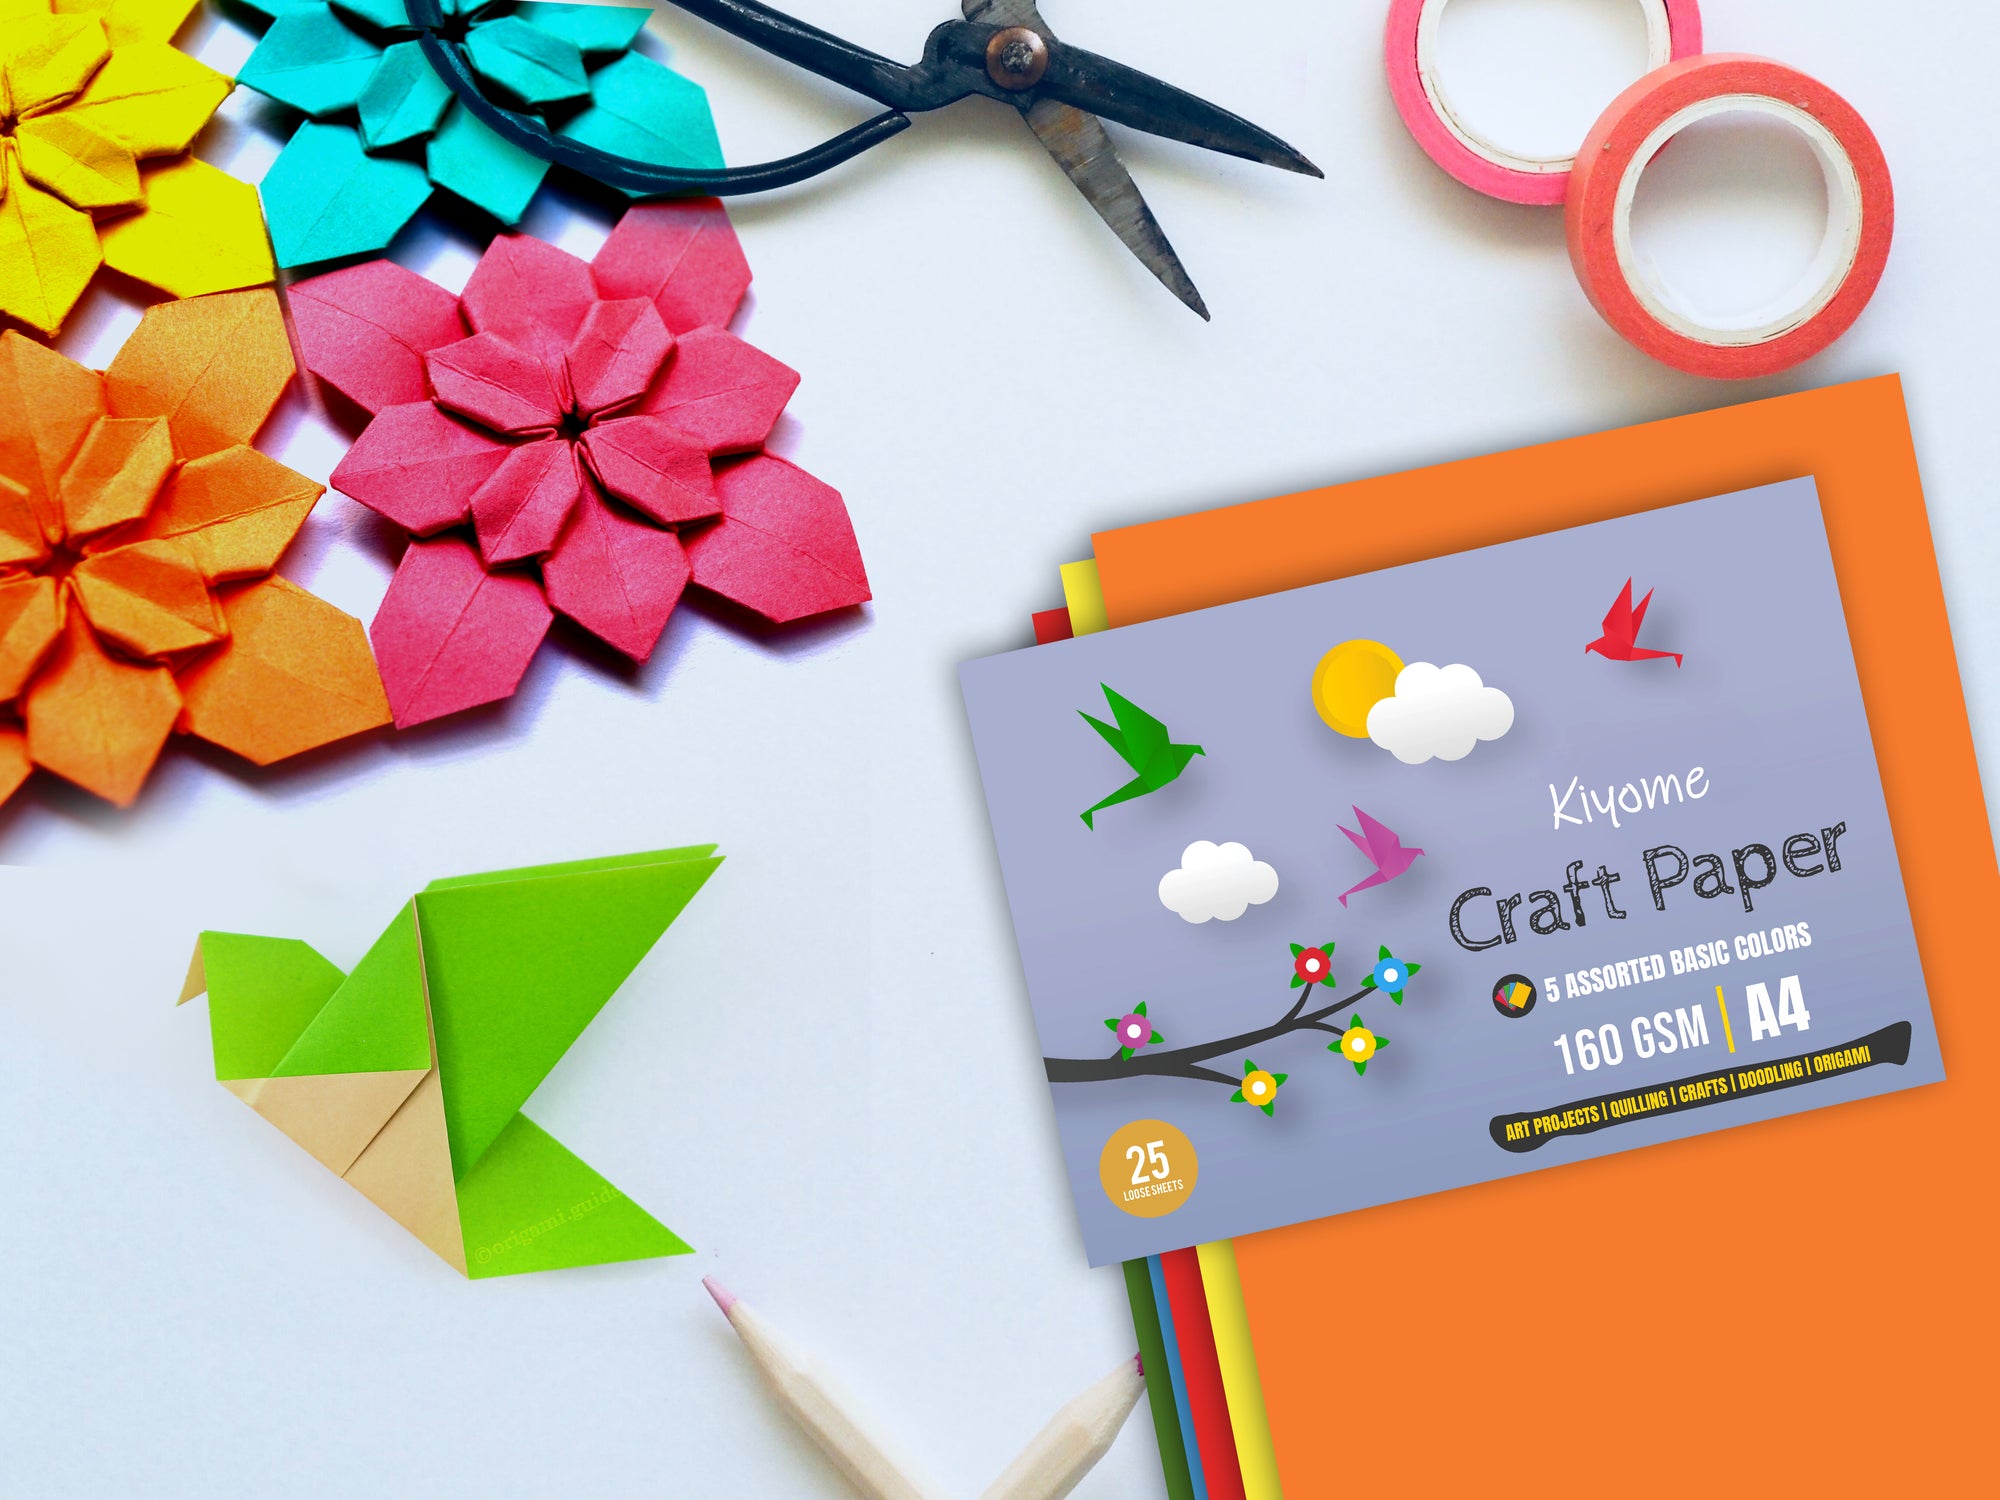 Kiyome Craft Paper | 160 GSM | A4 | 5 Assorted Colours | 25 Sheets